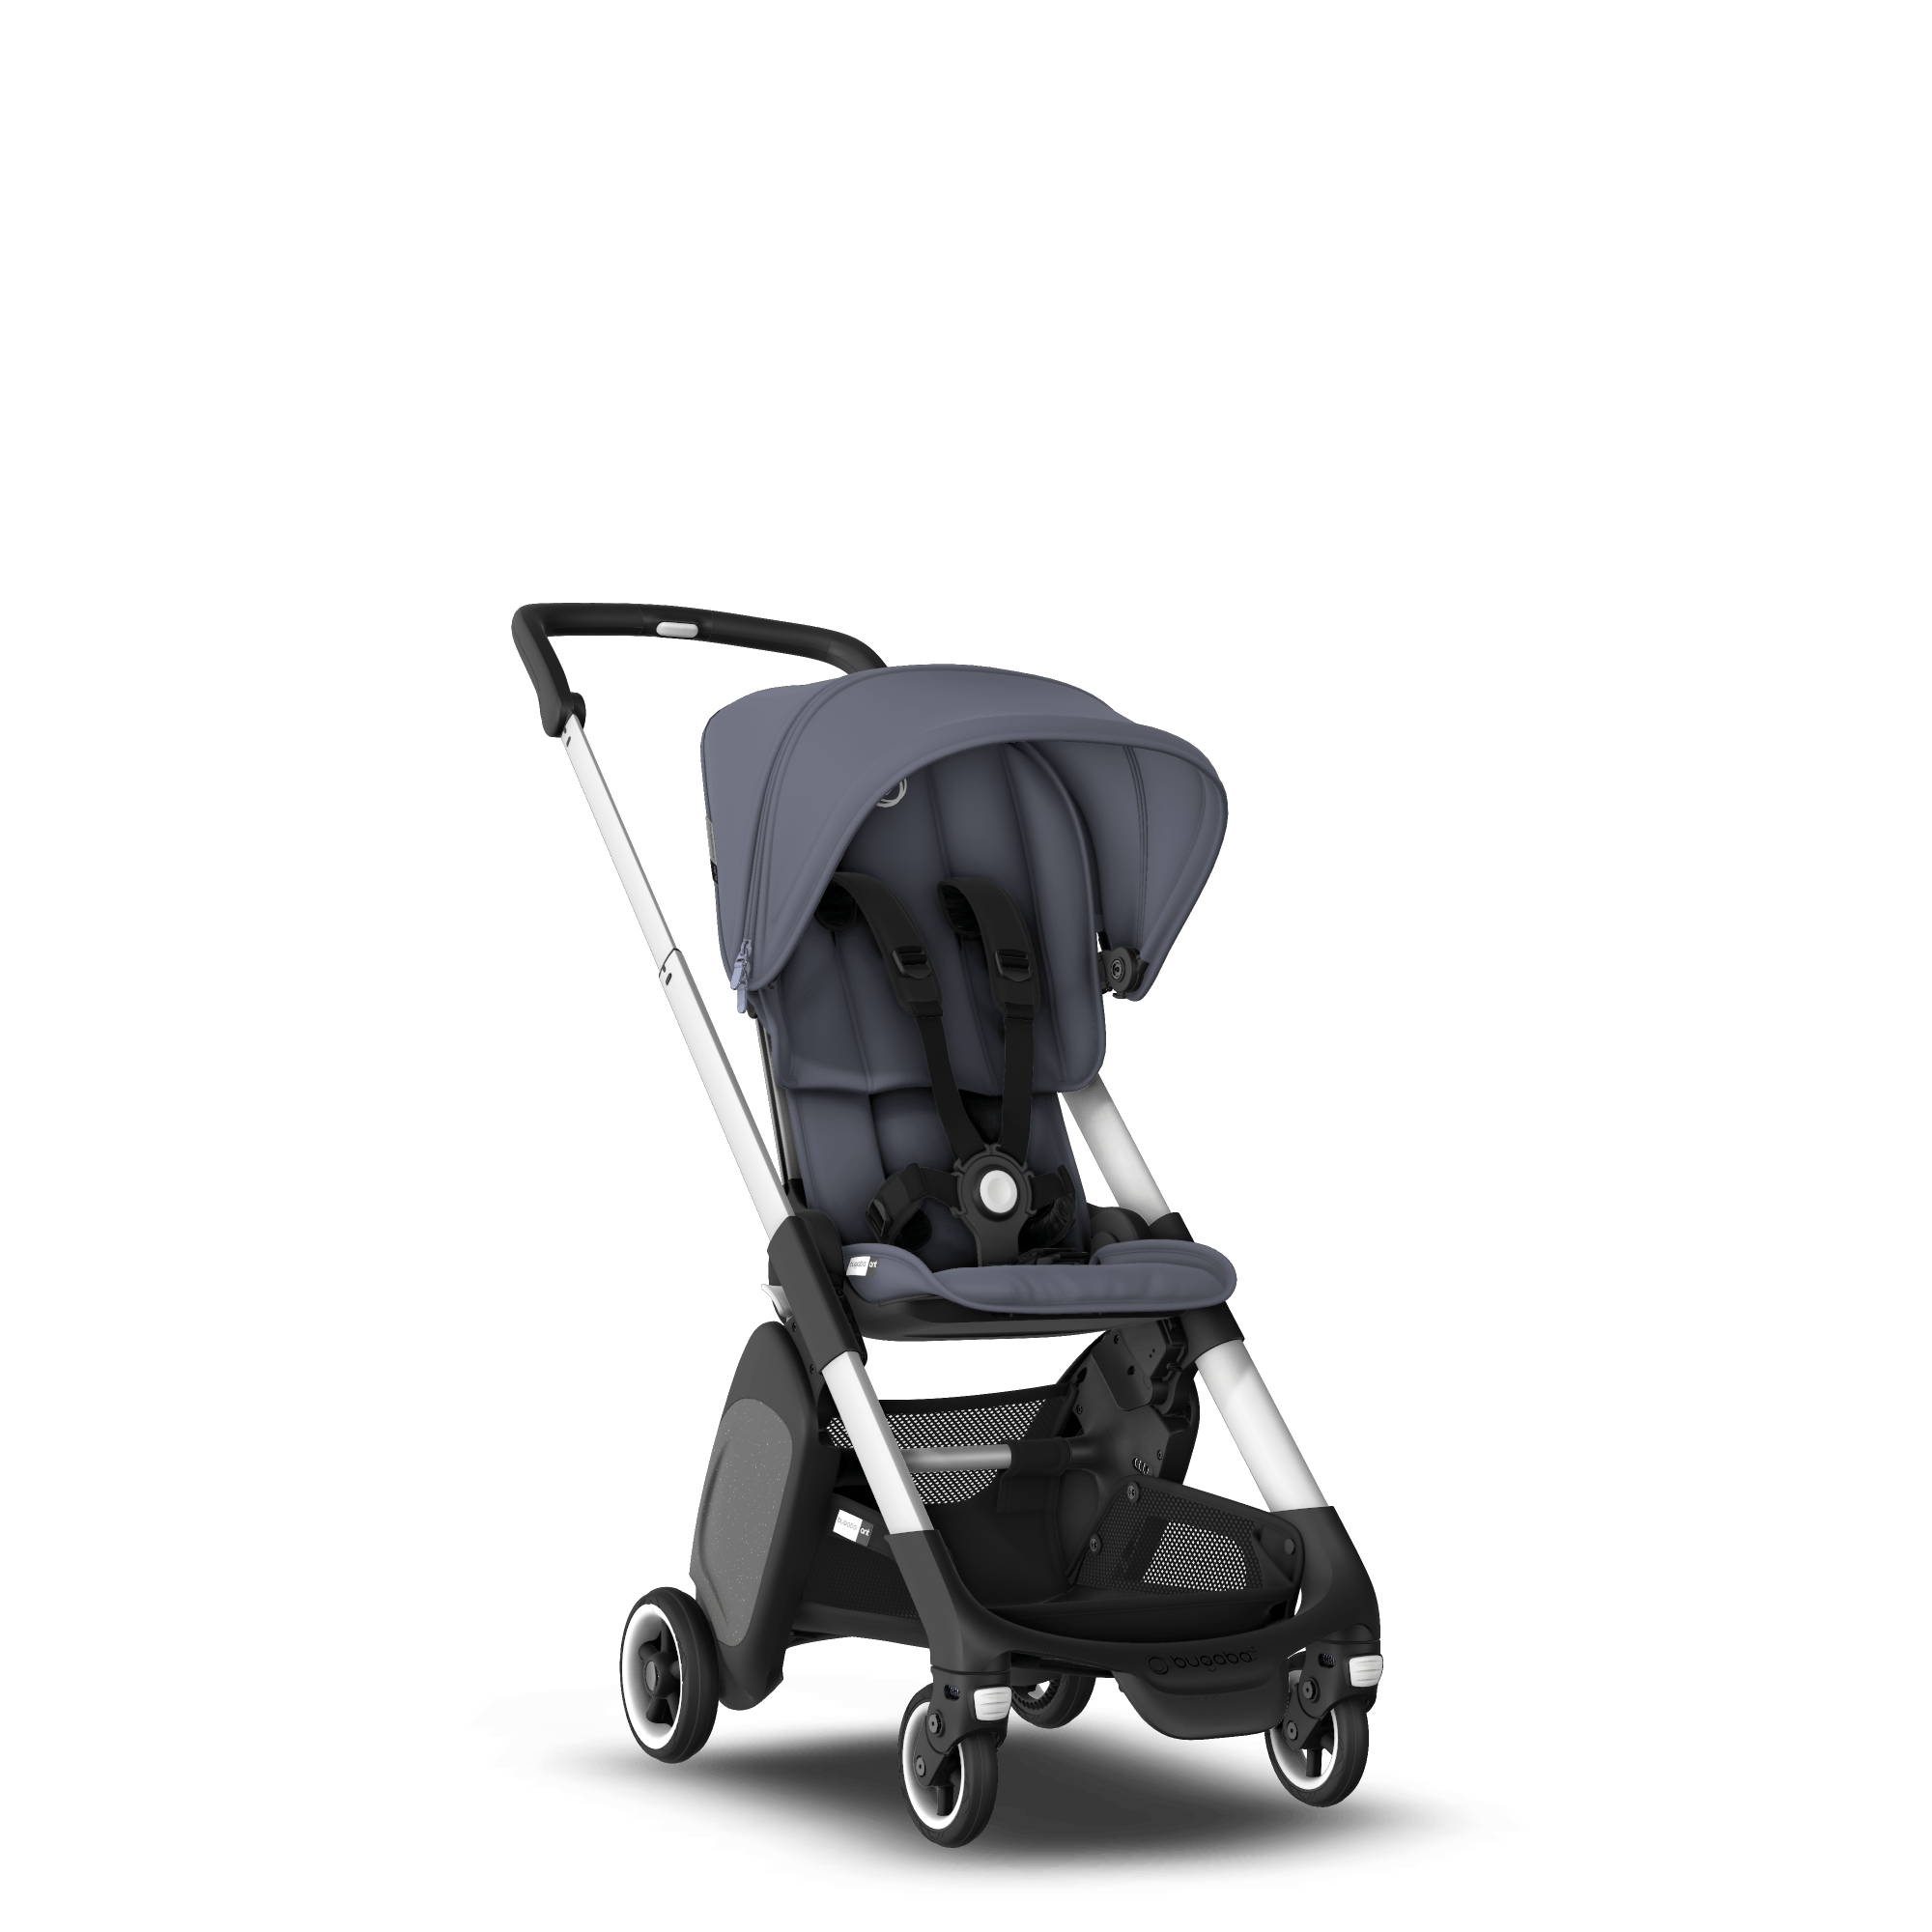 Foldable Stroller Grey Mélange Travel and Compact Storage Bugaboo Ant Baby Stroller Fits in Overhead Compartments Reversible and Reclinable Travel Stroller Lightweight Stroller 